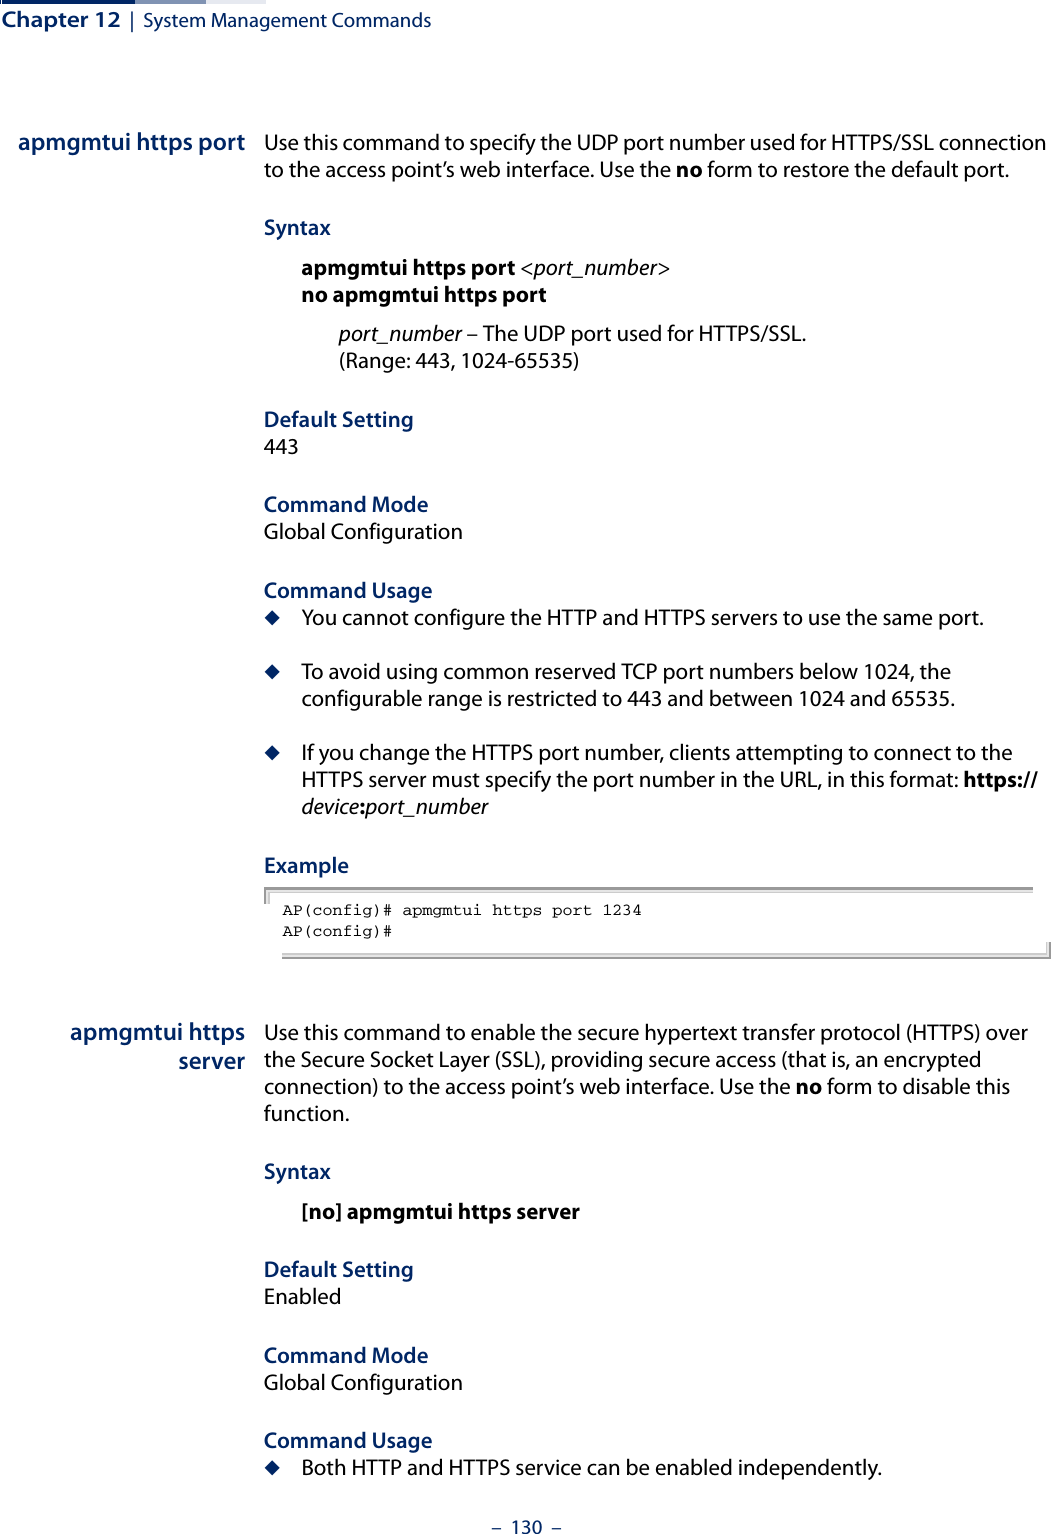 Chapter 12  |  System Management Commands–  130  –apmgmtui https port Use this command to specify the UDP port number used for HTTPS/SSL connection to the access point’s web interface. Use the no form to restore the default port.Syntax apmgmtui https port &lt;port_number&gt;no apmgmtui https portport_number – The UDP port used for HTTPS/SSL. (Range: 443, 1024-65535)Default Setting 443Command Mode Global ConfigurationCommand Usage ◆You cannot configure the HTTP and HTTPS servers to use the same port.◆To avoid using common reserved TCP port numbers below 1024, the configurable range is restricted to 443 and between 1024 and 65535. ◆If you change the HTTPS port number, clients attempting to connect to the HTTPS server must specify the port number in the URL, in this format: https://device:port_numberExample AP(config)# apmgmtui https port 1234AP(config)#apmgmtui httpsserverUse this command to enable the secure hypertext transfer protocol (HTTPS) over the Secure Socket Layer (SSL), providing secure access (that is, an encrypted connection) to the access point’s web interface. Use the no form to disable this function.Syntax [no] apmgmtui https serverDefault Setting EnabledCommand Mode Global ConfigurationCommand Usage ◆Both HTTP and HTTPS service can be enabled independently.